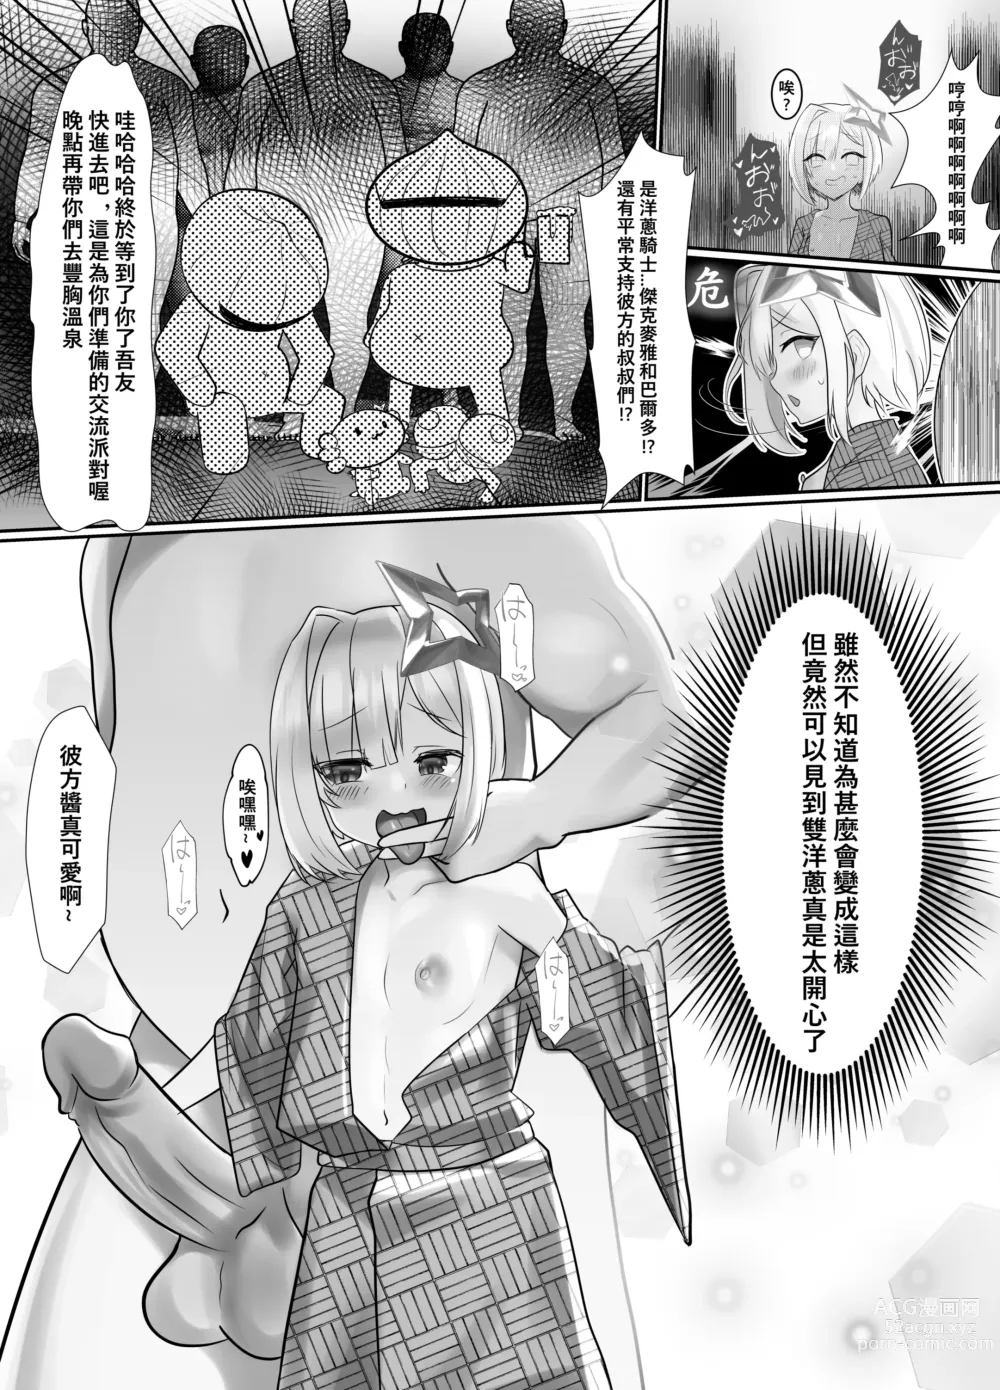 Page 3 of doujinshi Holy Spring